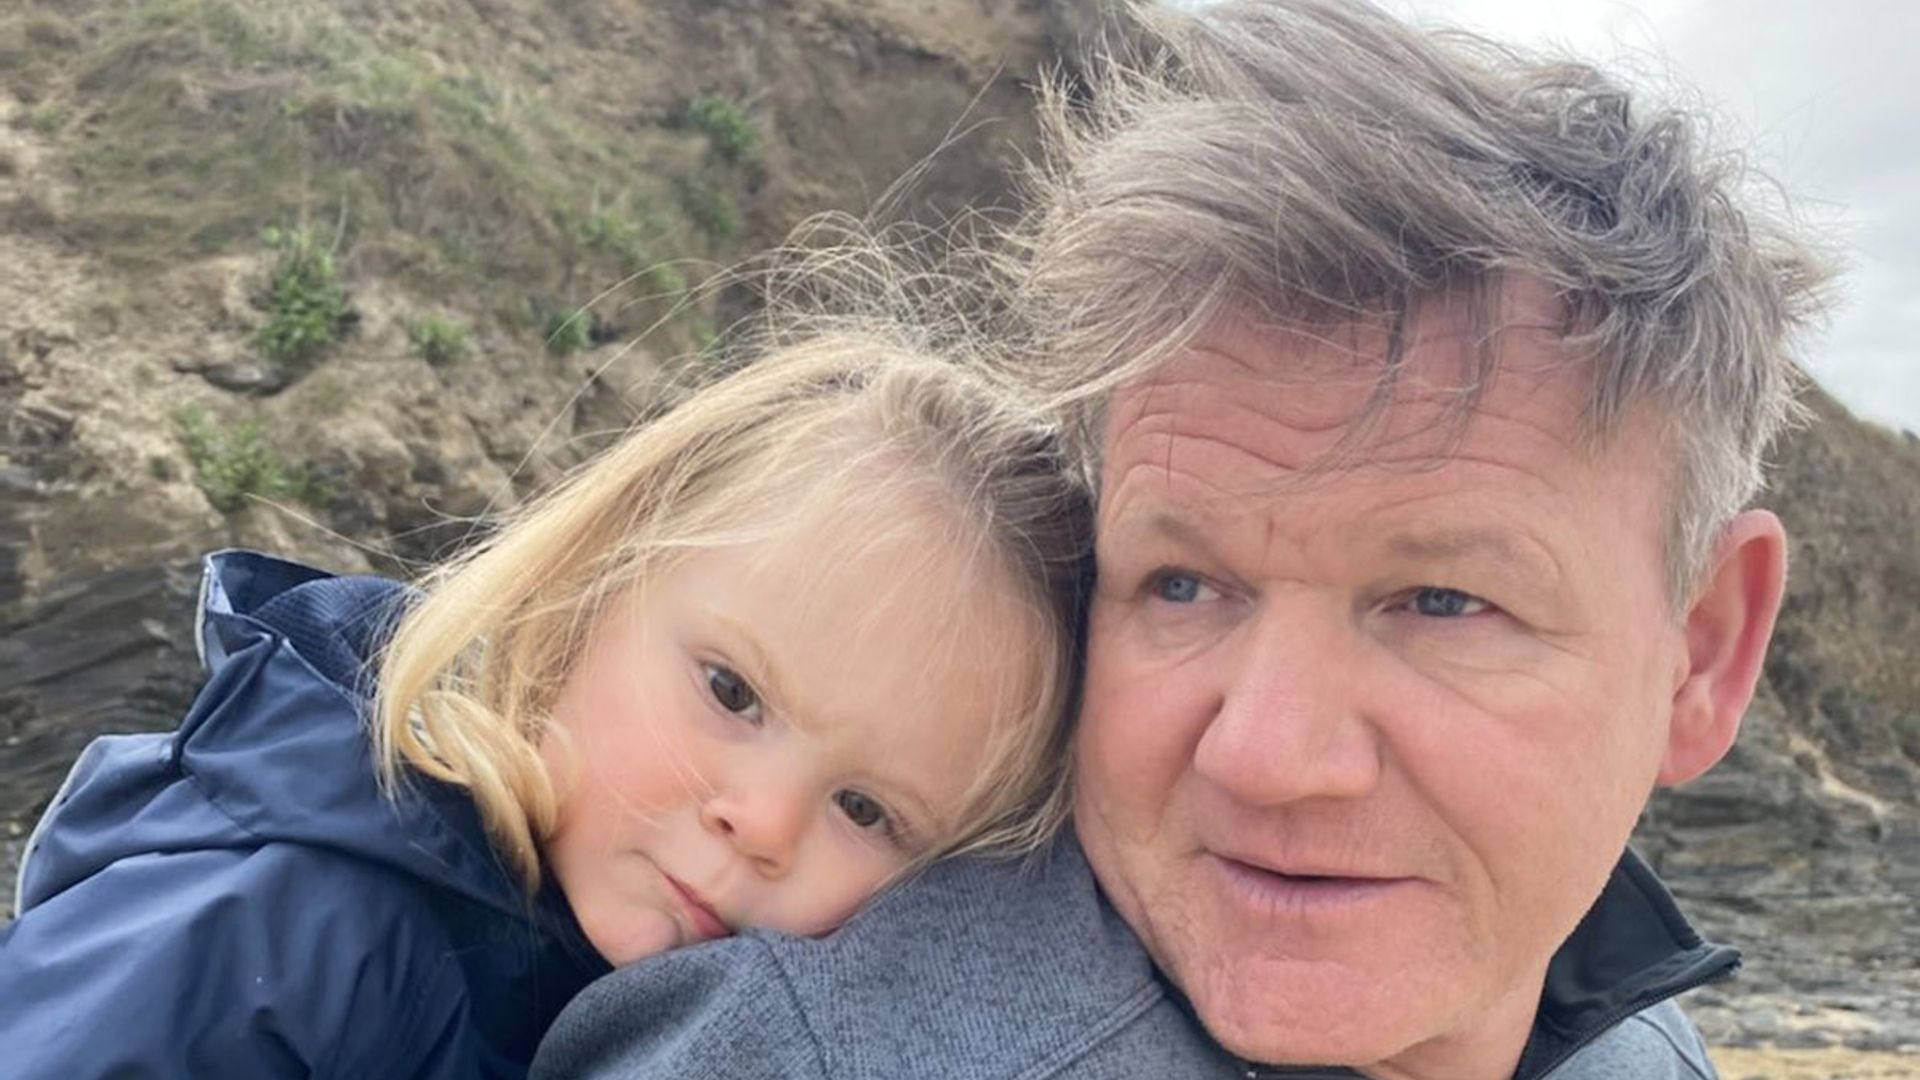 Gordon Ramsay shares angry photo of lookalike son Oscar - just look at that frown!